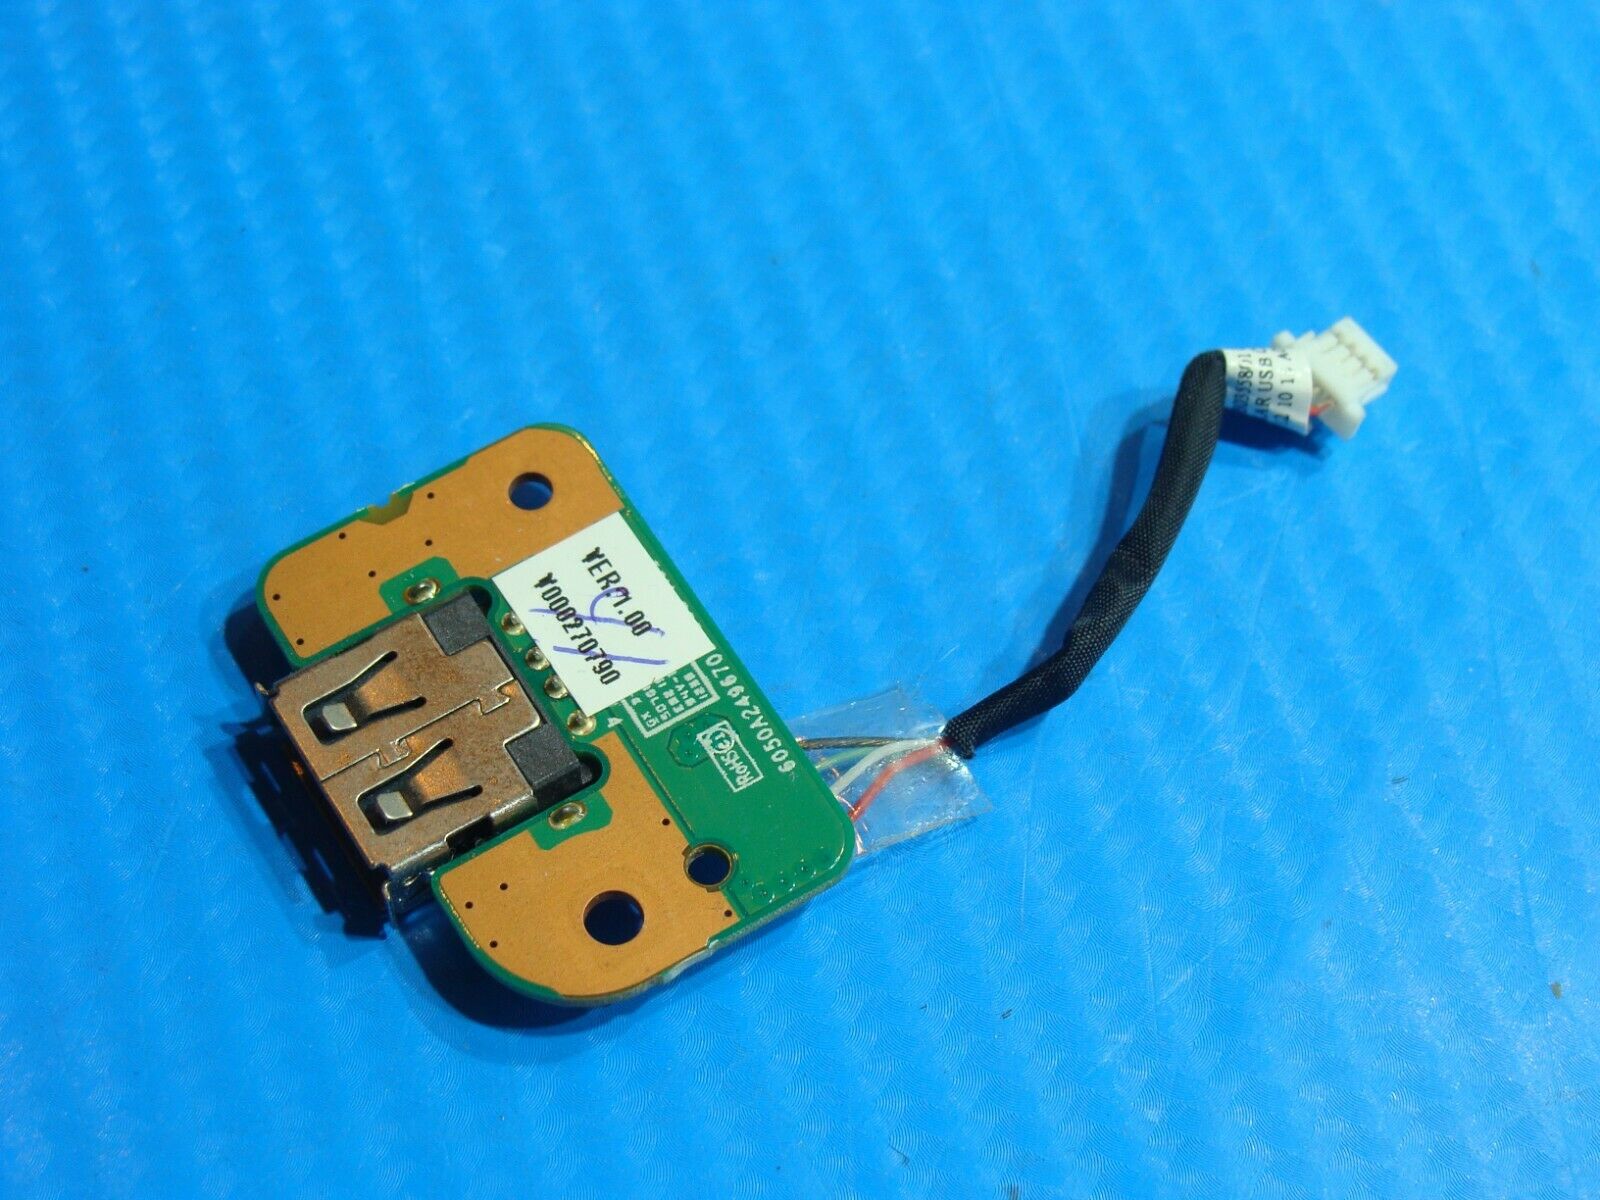 Toshiba Satellite C855-S5350 15.6" Genuine USB Port Board w/Cable V000270790 - Laptop Parts - Buy Authentic Computer Parts - Top Seller Ebay